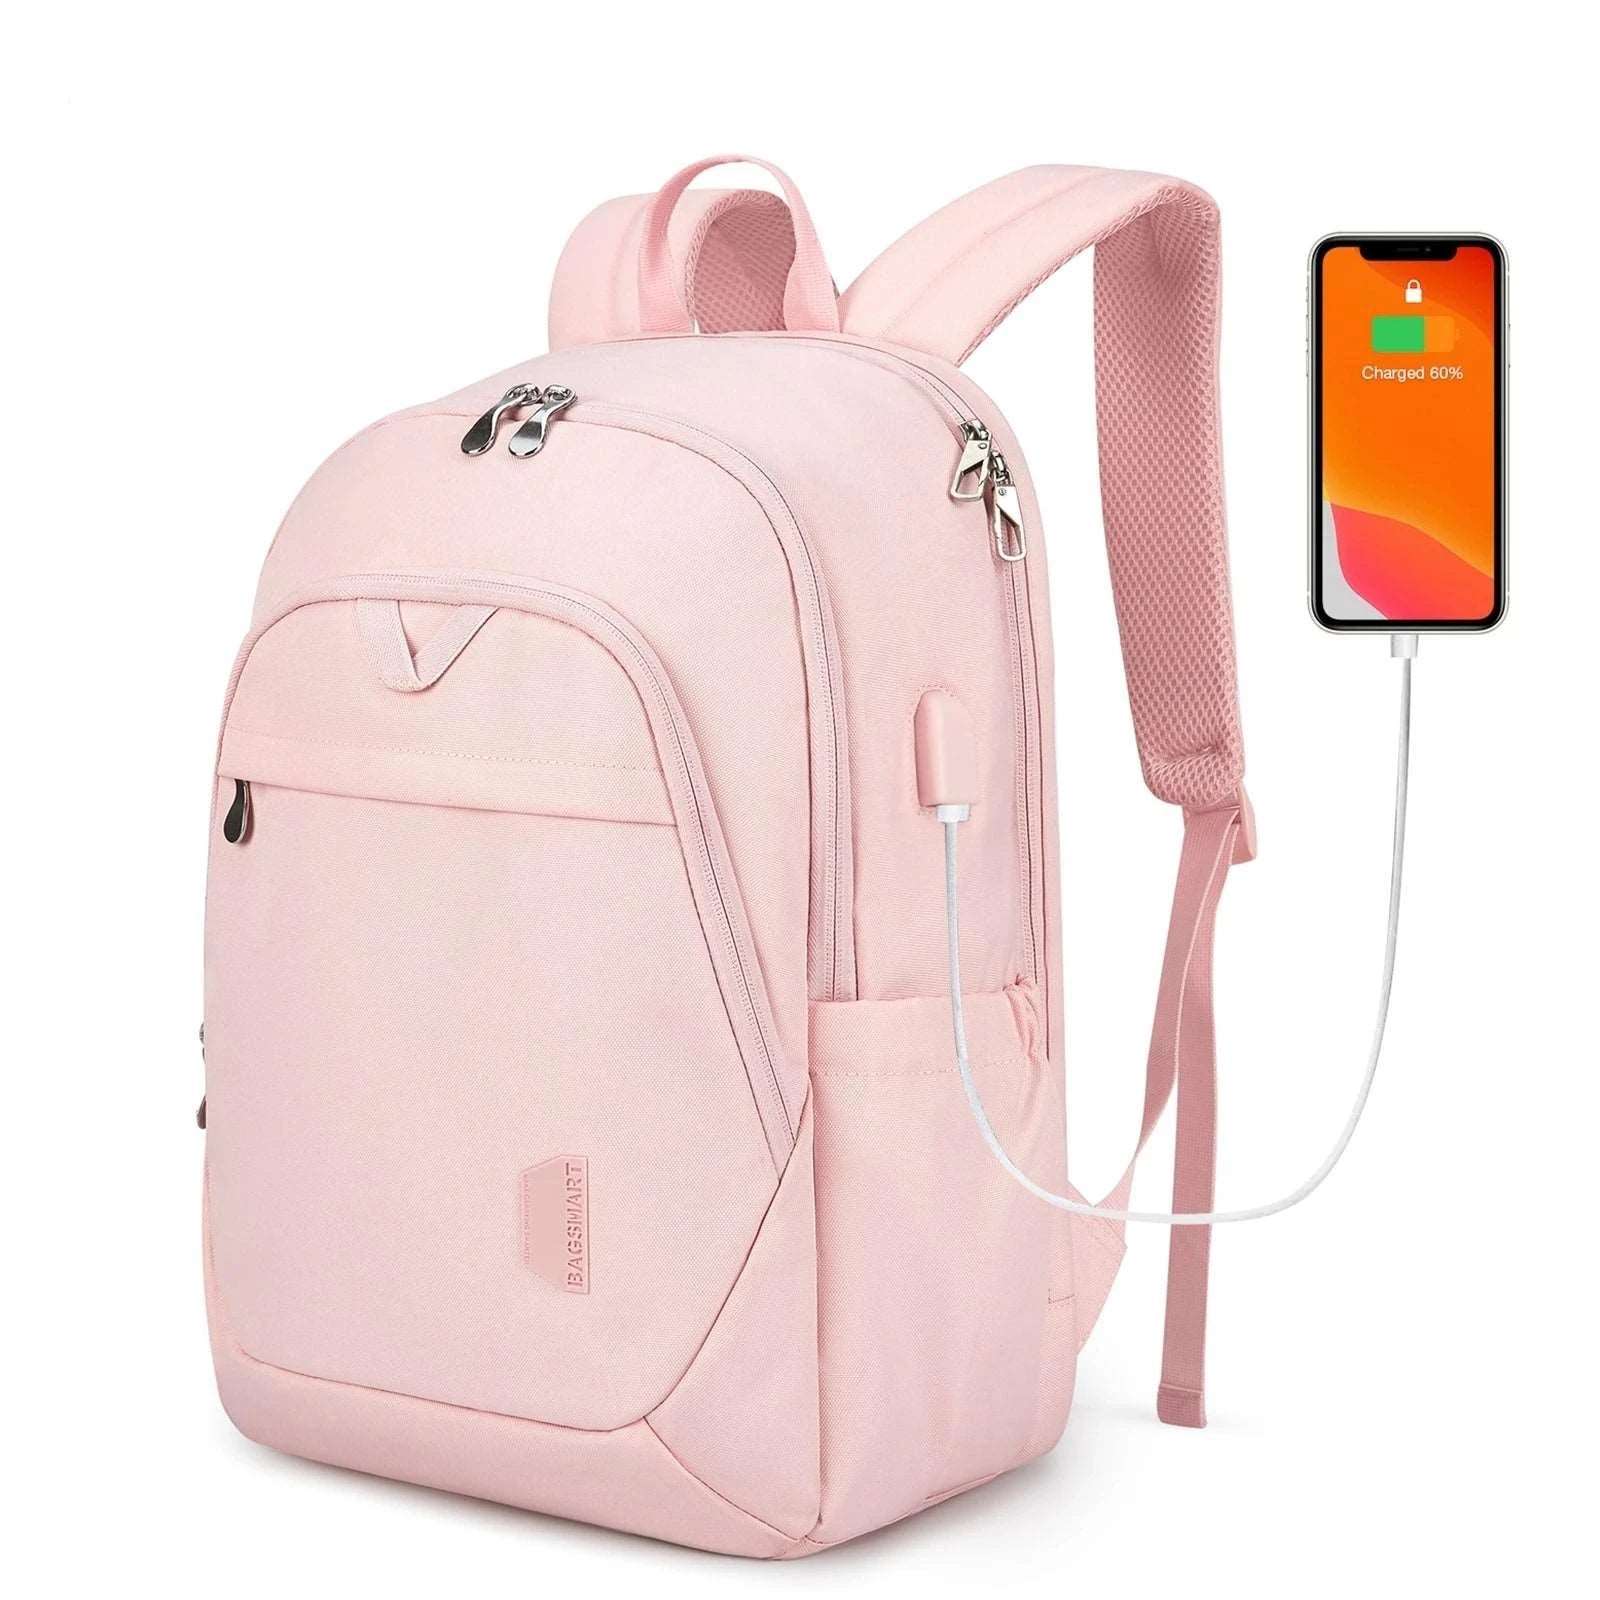 BAGSMART Men's/Women's Backpack Anti-theft Large Waterproof with USB Charging Port 15.6inch laptop Pink